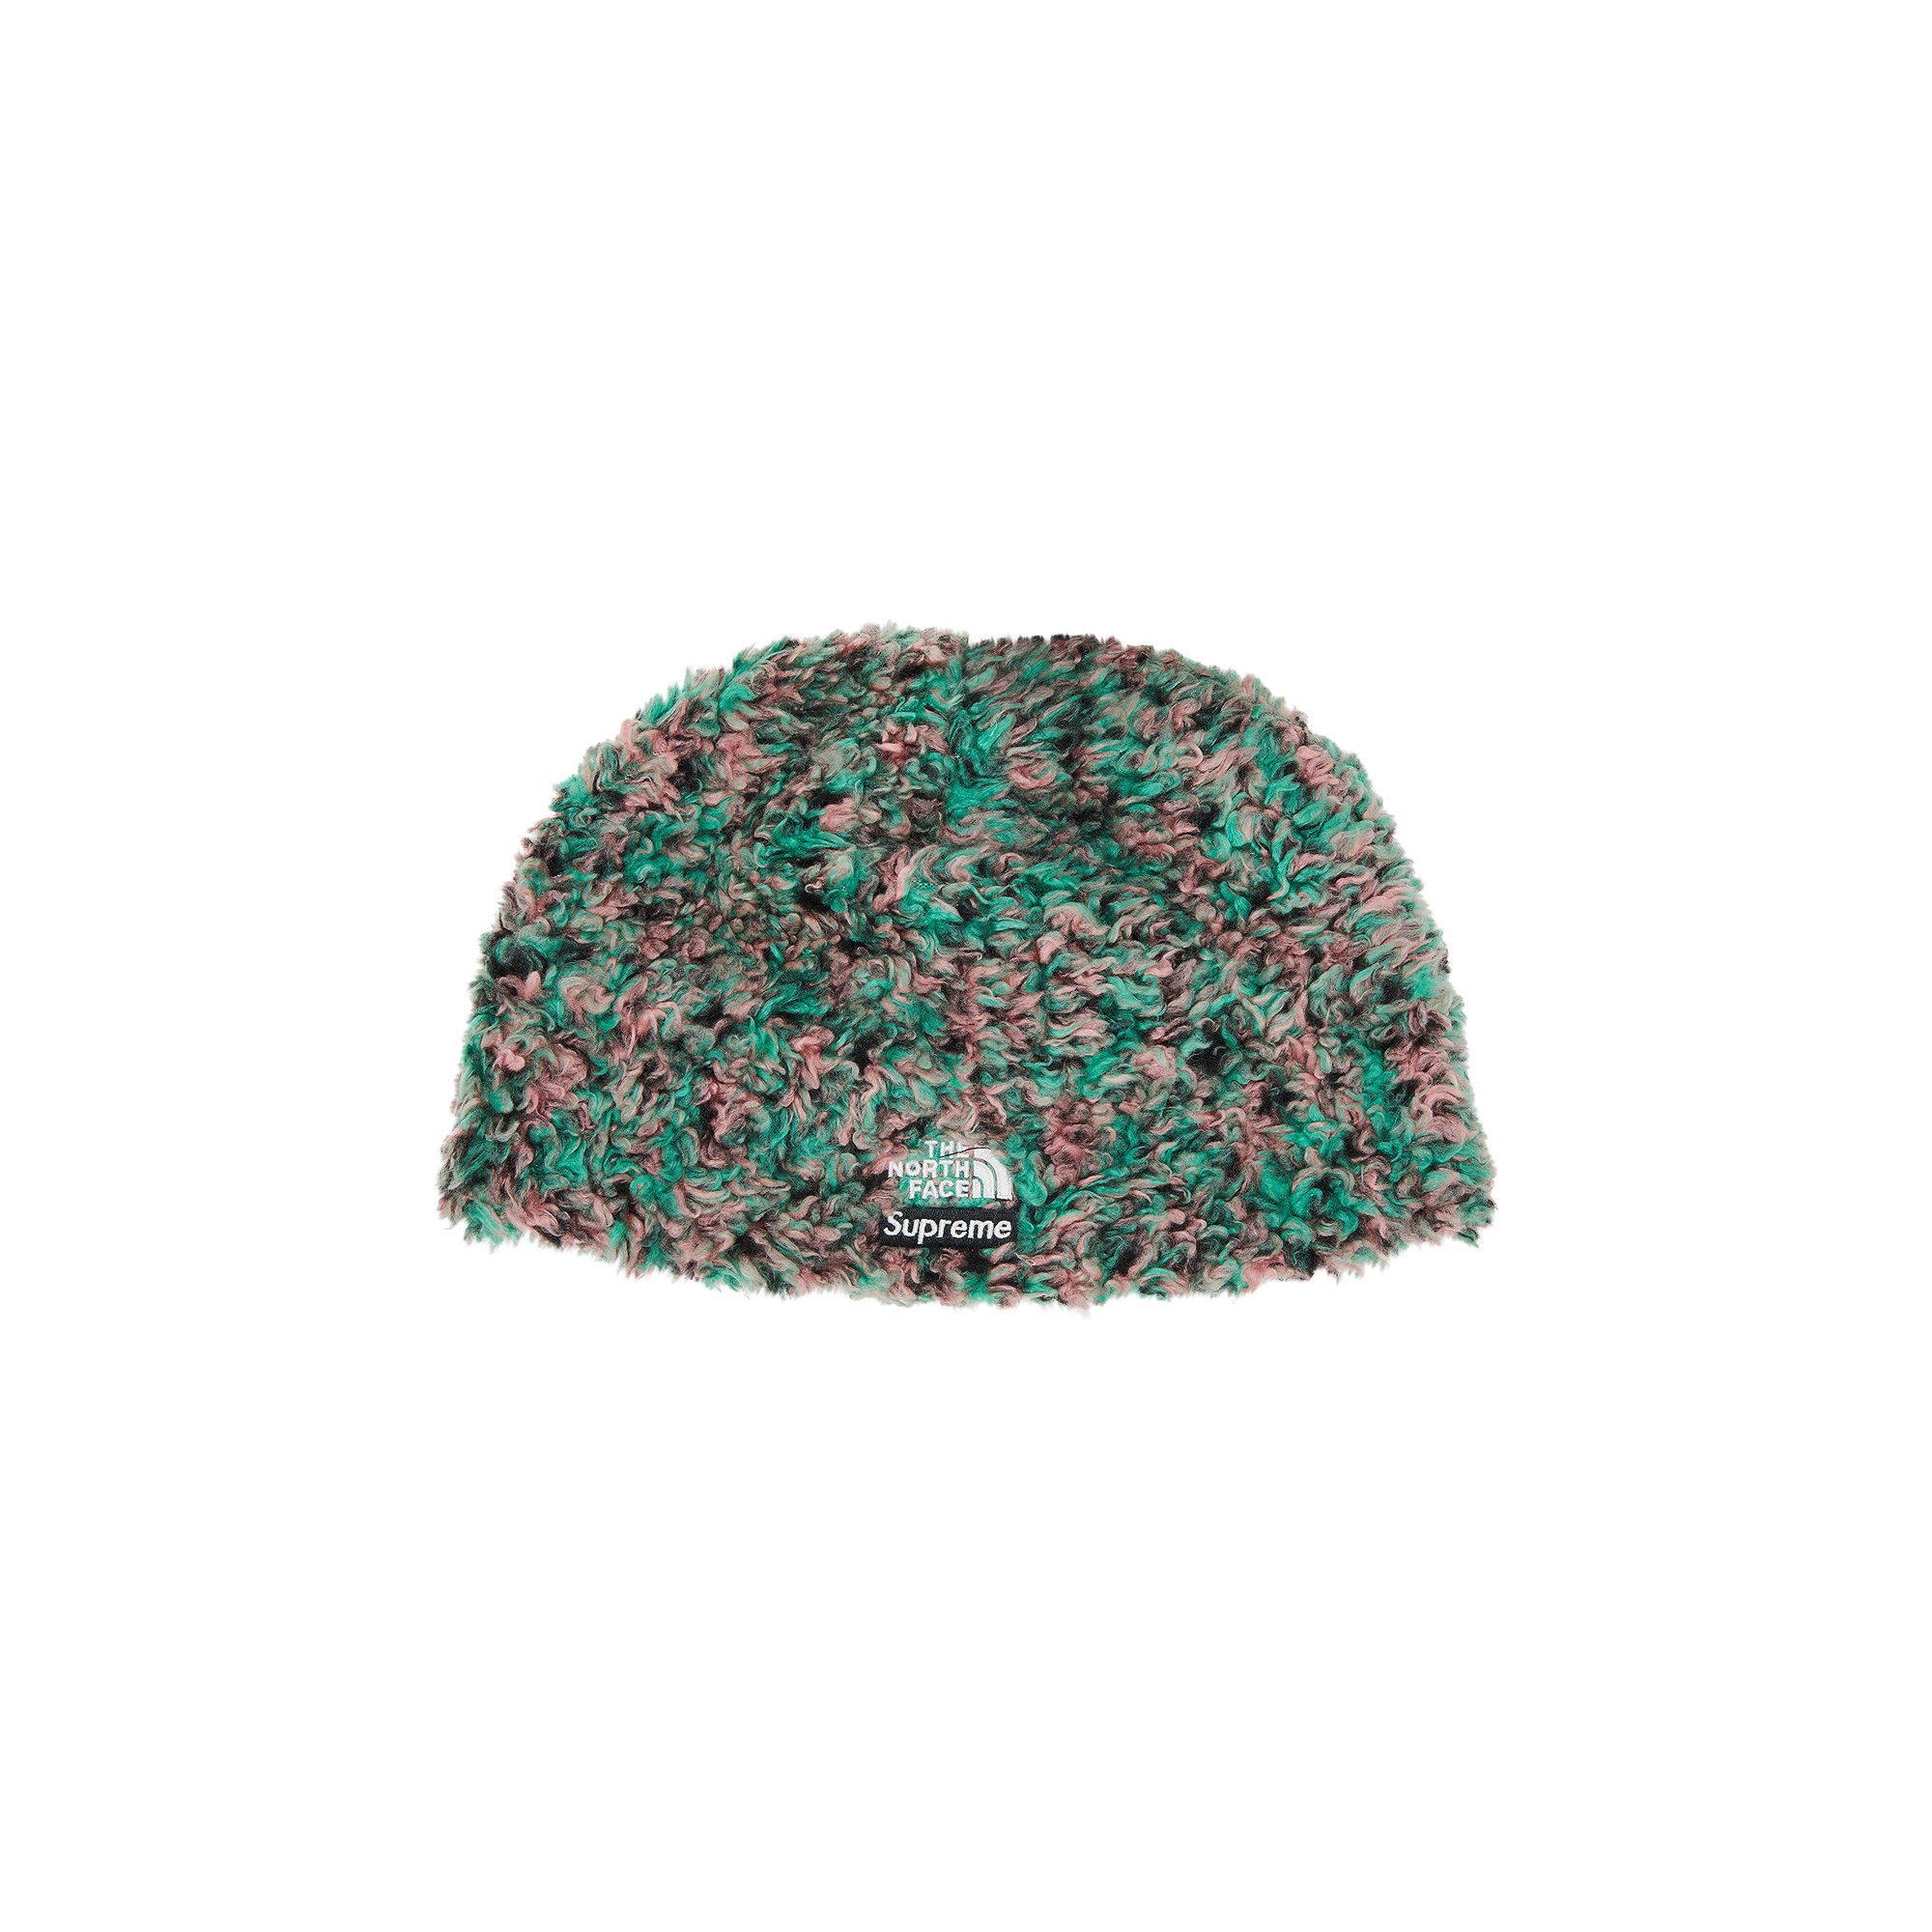 Buy Supreme x The North Face High Pile Fleece Beanie 'Multicolor